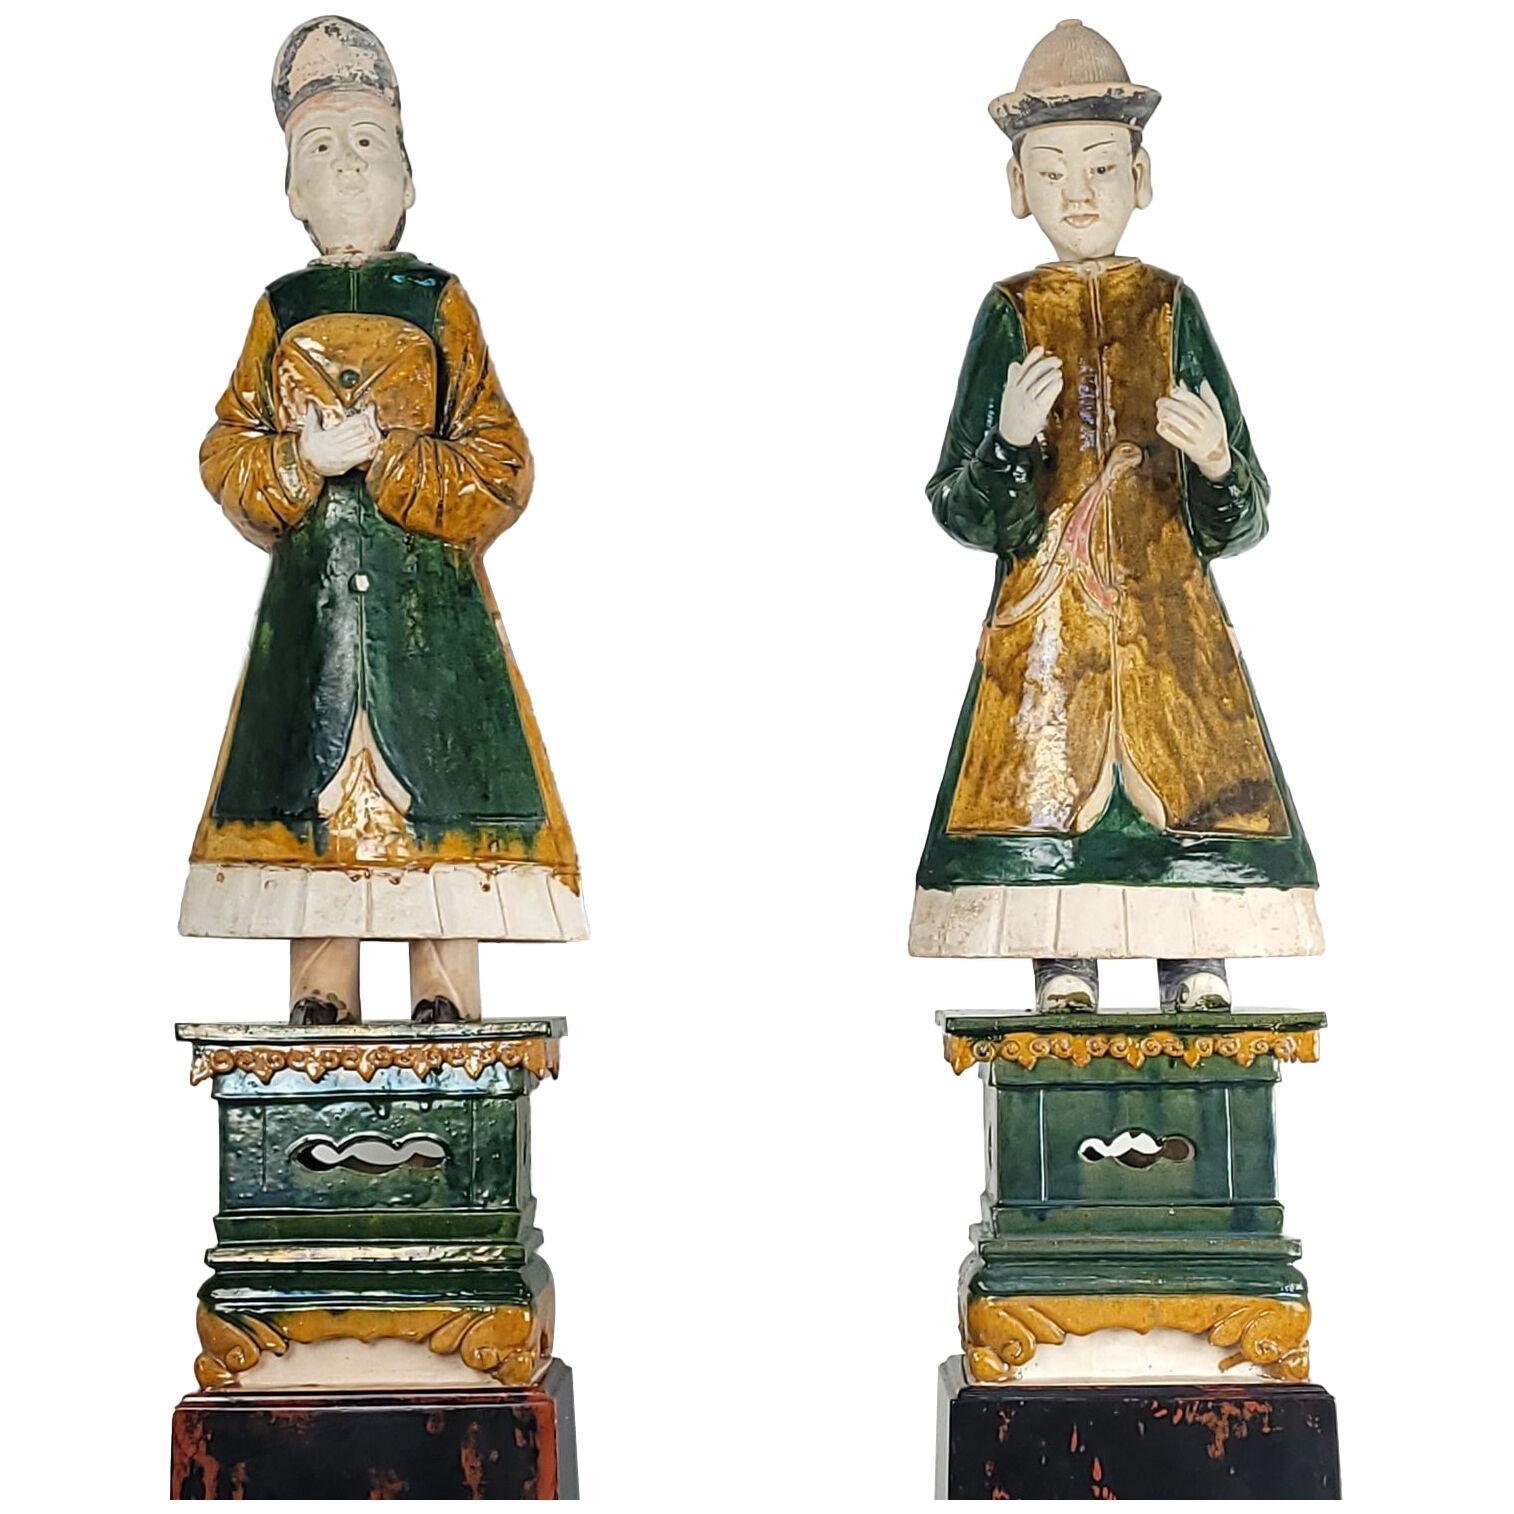 Pair of Ming Dynasty Court Figures on Lacquer Stands